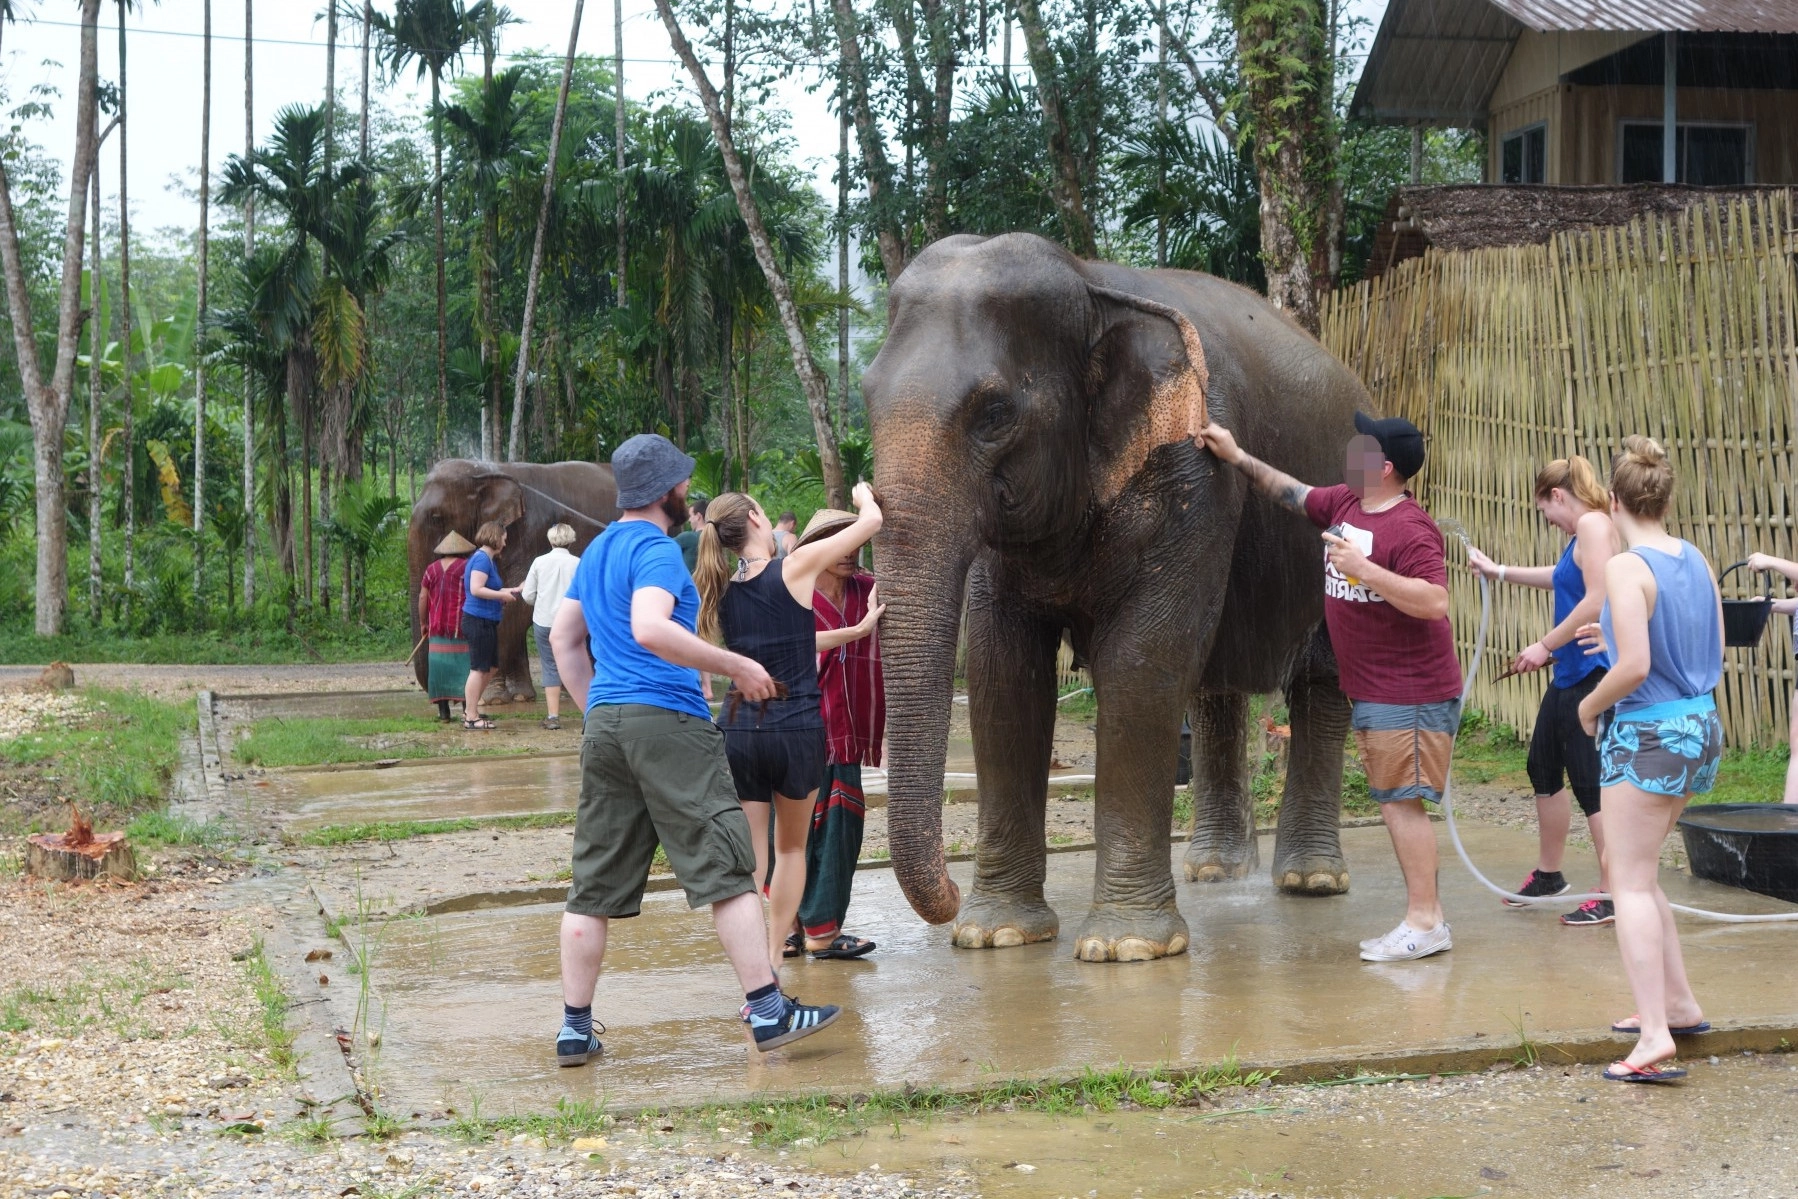 An elephant being washed by a group of tourists and a mahout. Behind another station is visible, where the same thing is happening to another elephant.